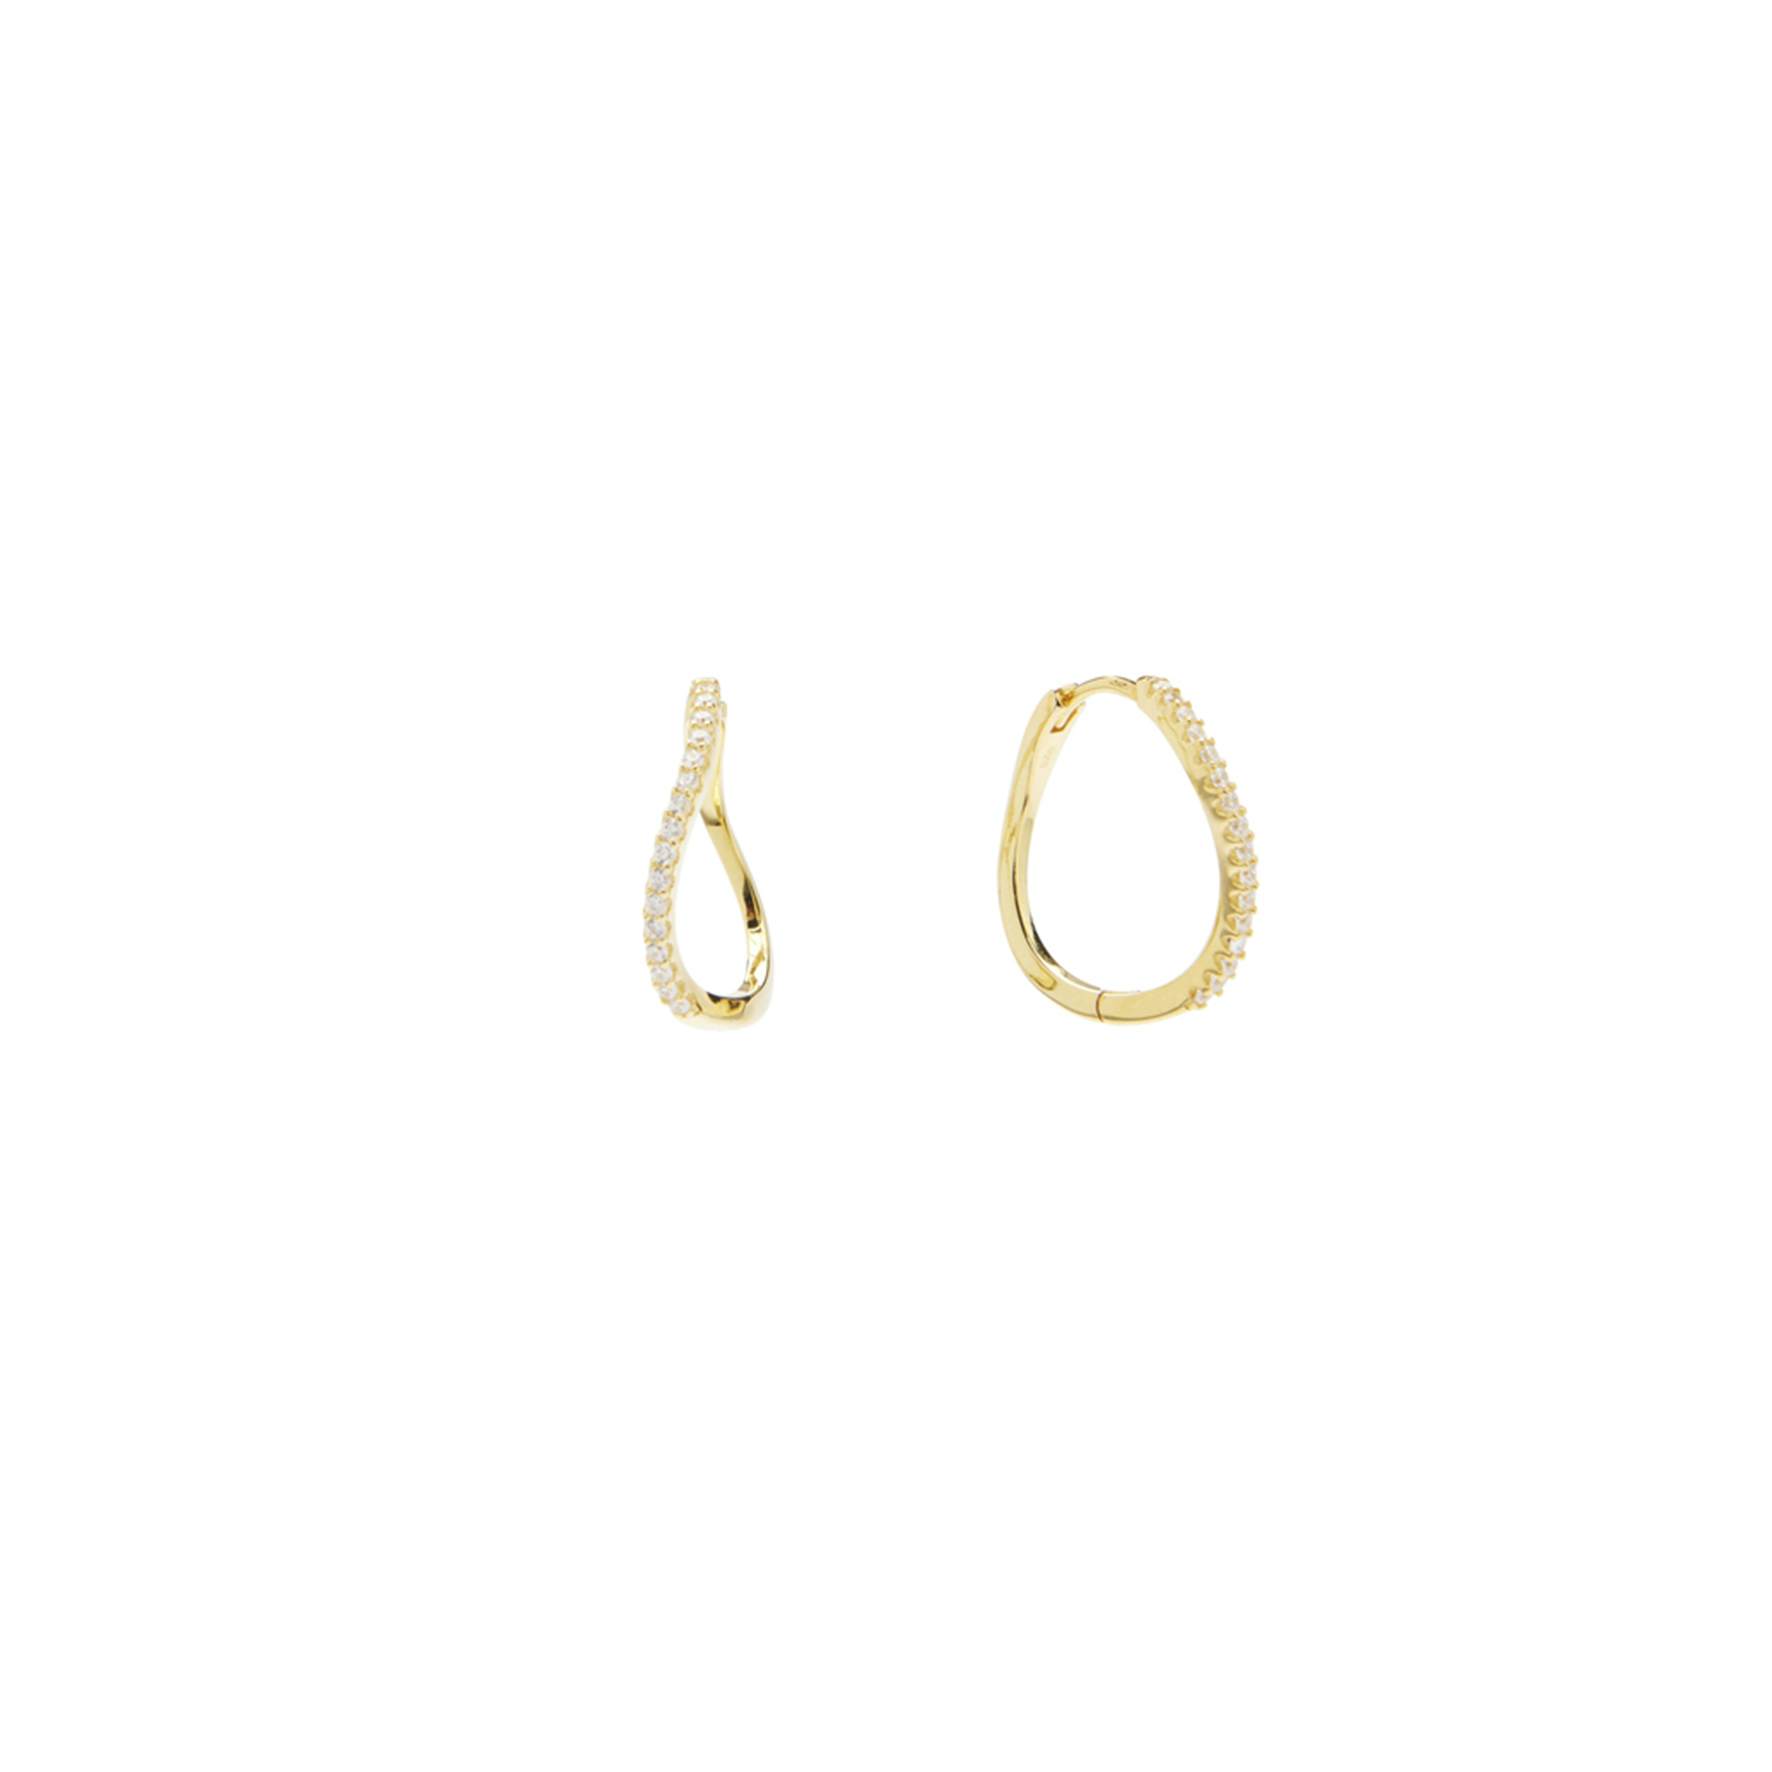 Amelia Petit Hoops from Pico in Goldplated-Silver Sterling 925